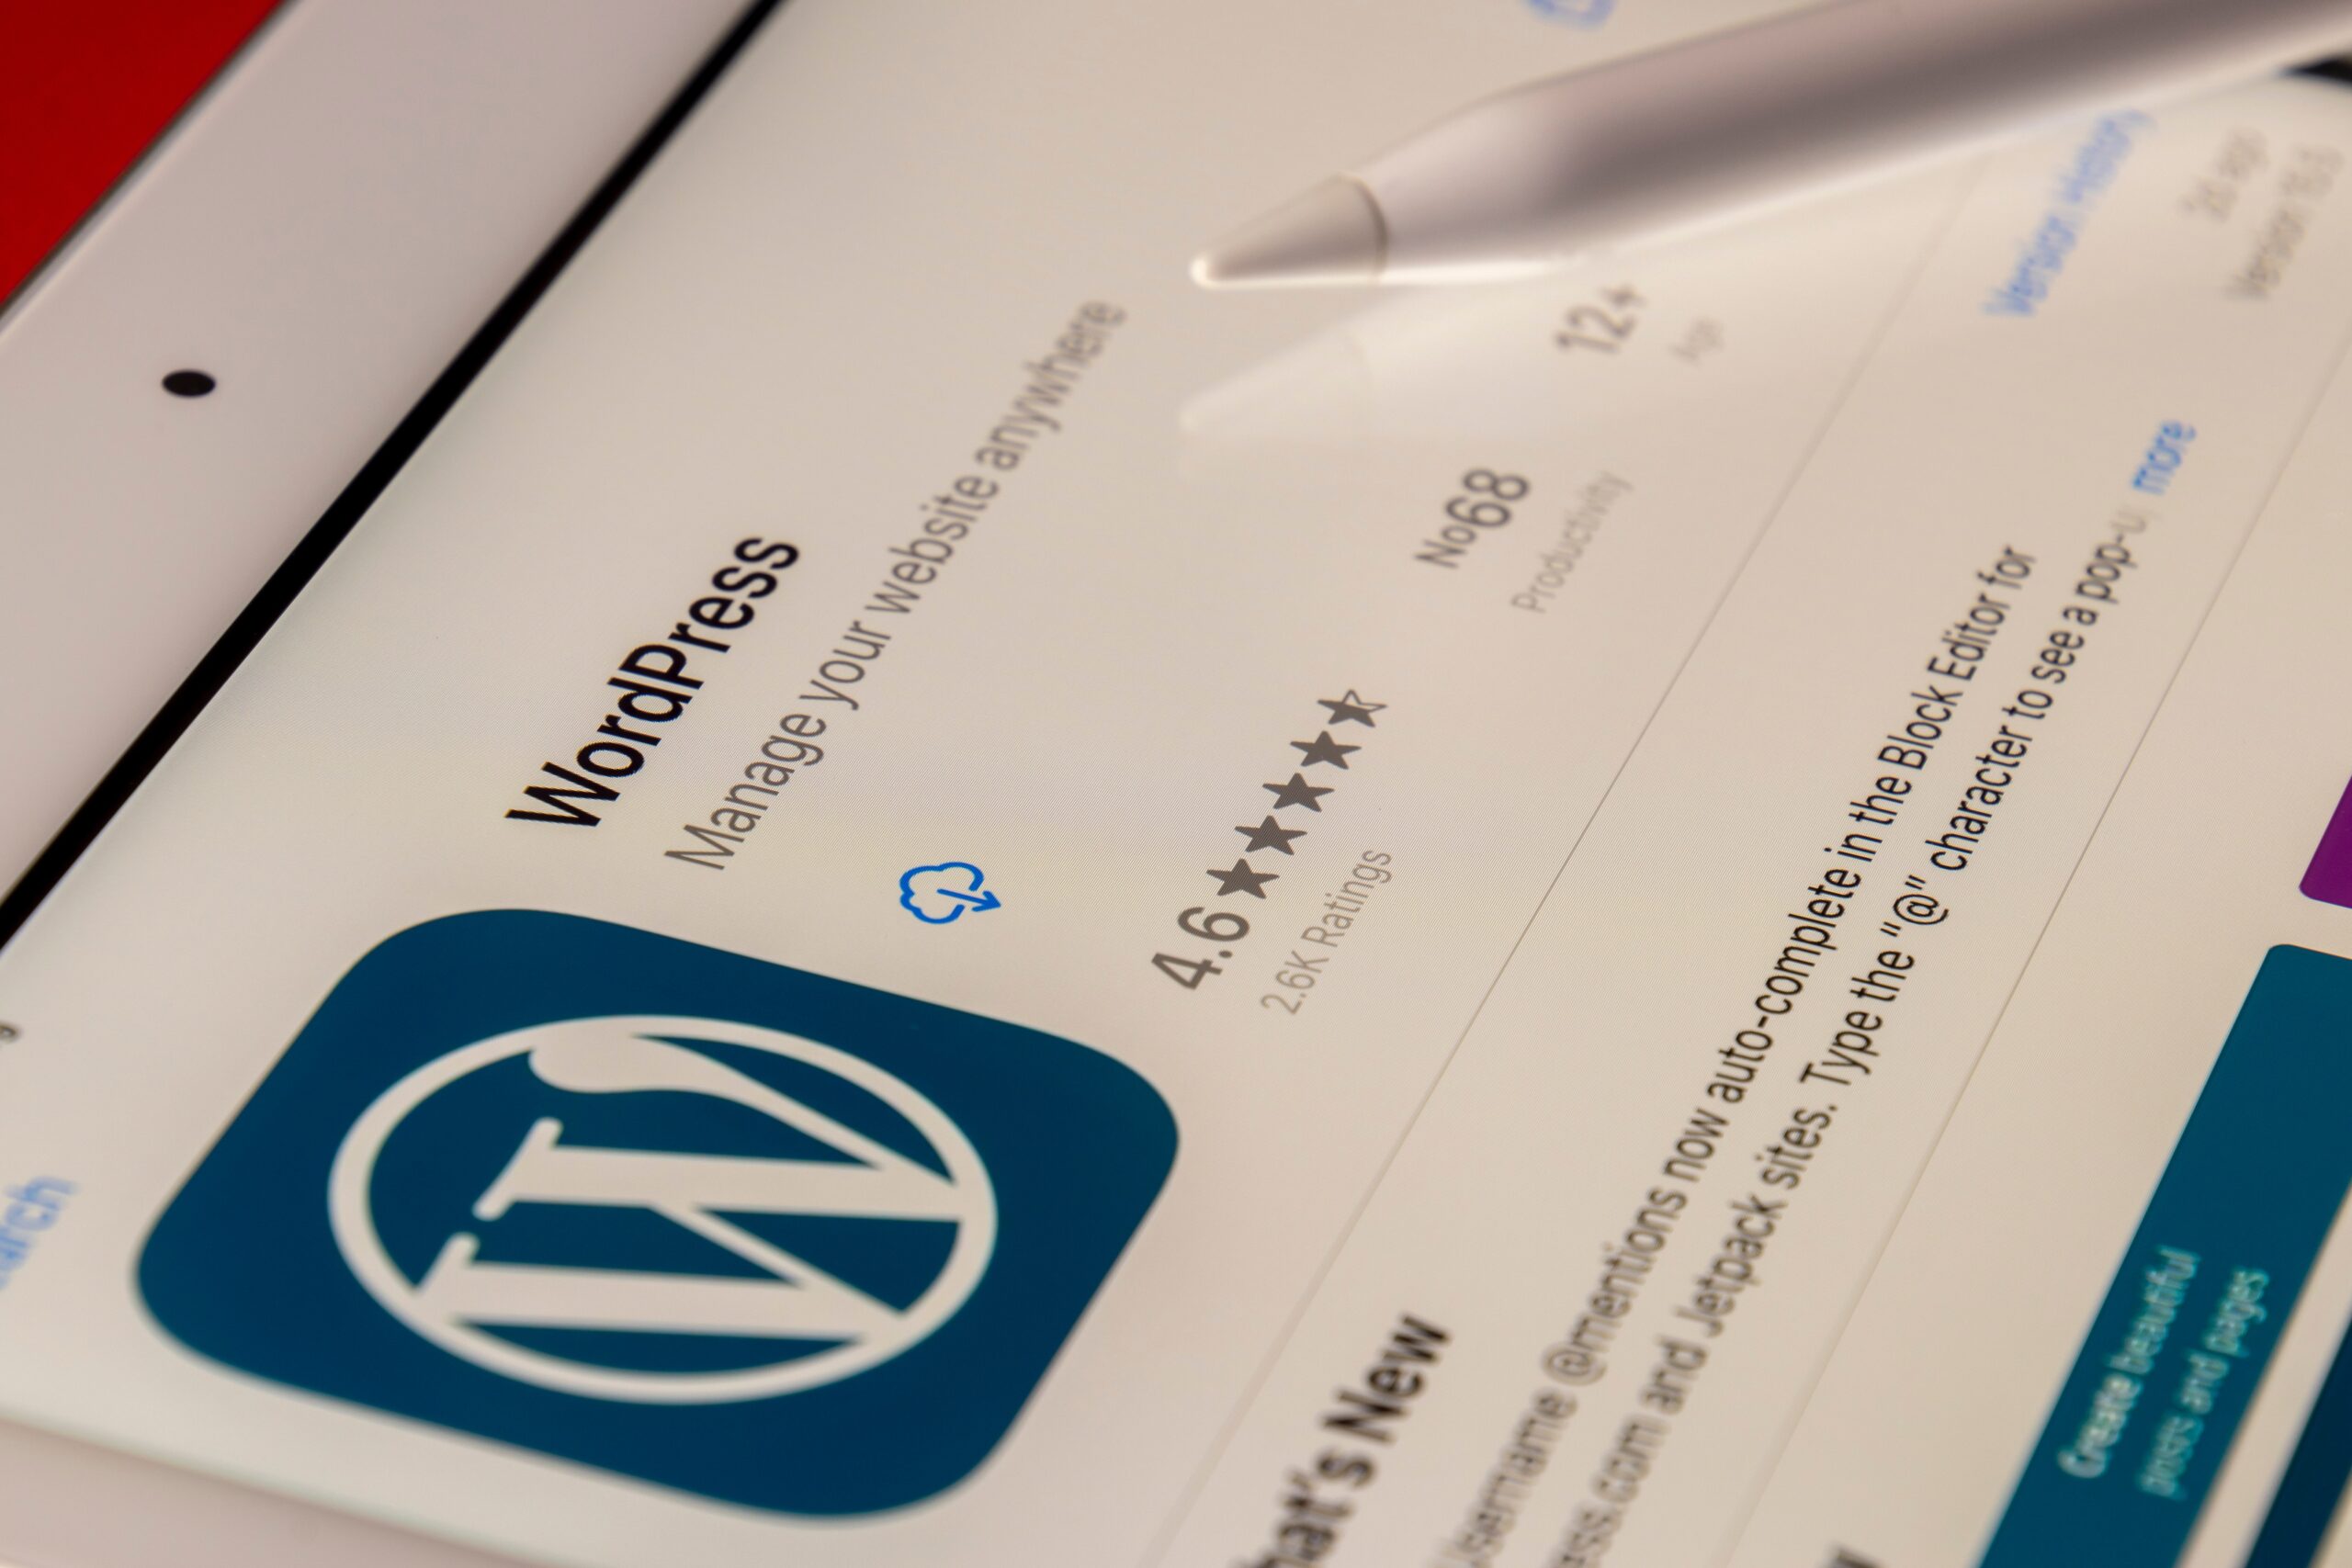 Top 5 WordPress Plugins for Auto Importing and Uploading External Images to WordPress